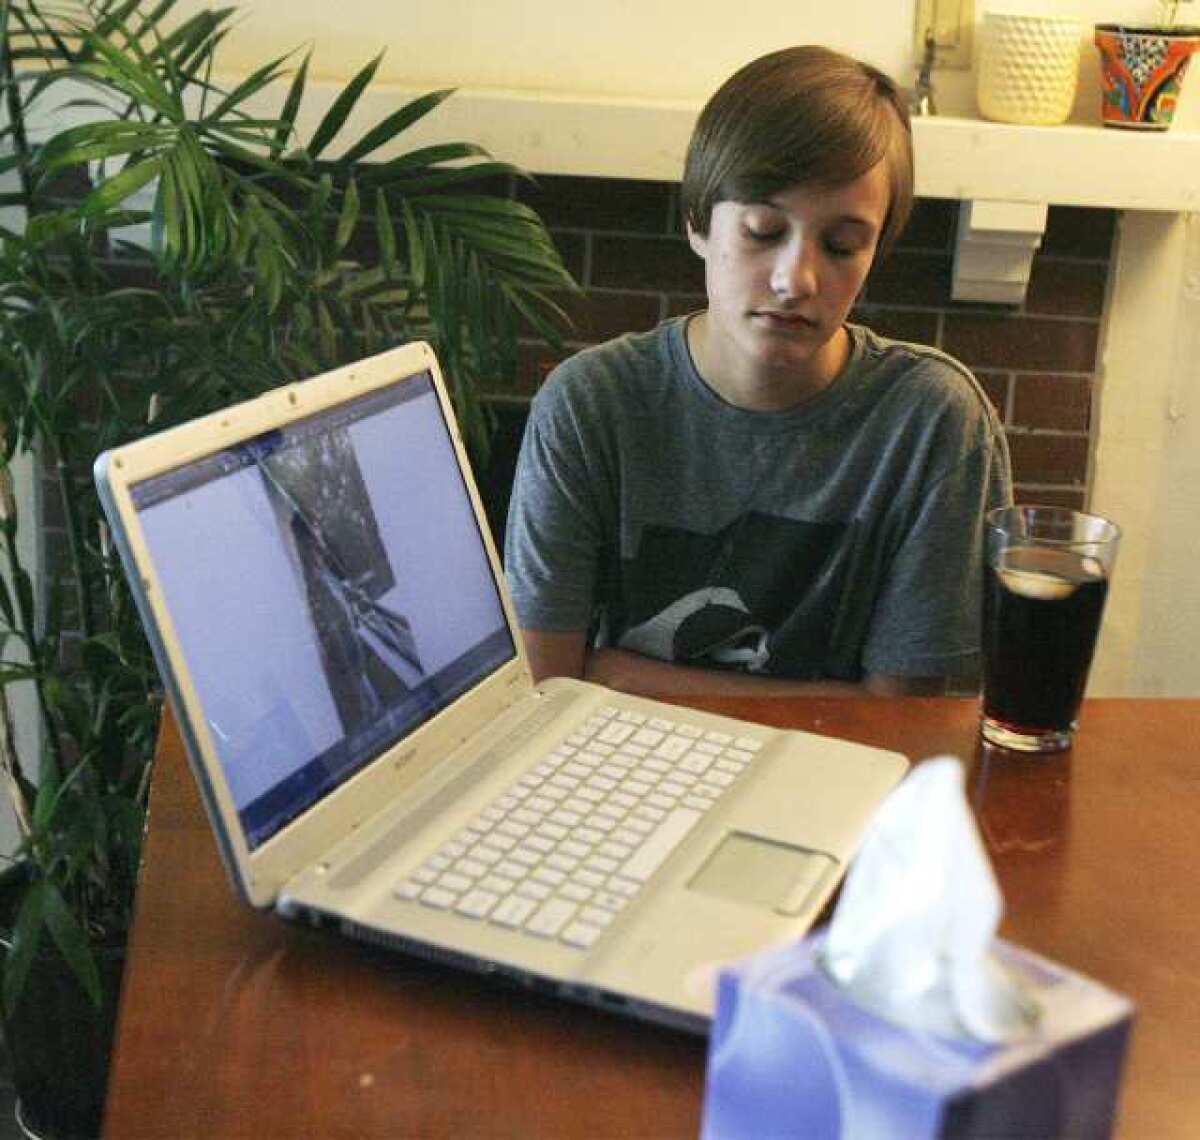 With a photo of his mom on a laptop, Brandon Holbrooks, 15, sits in his step-grandfather's apartment in Glendale. Brandon and his sister Ashley, 18, moved in with their step-grandfather after their mom died, possibly from an asthma attack, during the Christmas break. Her funeral is Saturday. Their father committed suicide three years ago. They are looking to the community for help with funeral and moving expenses.